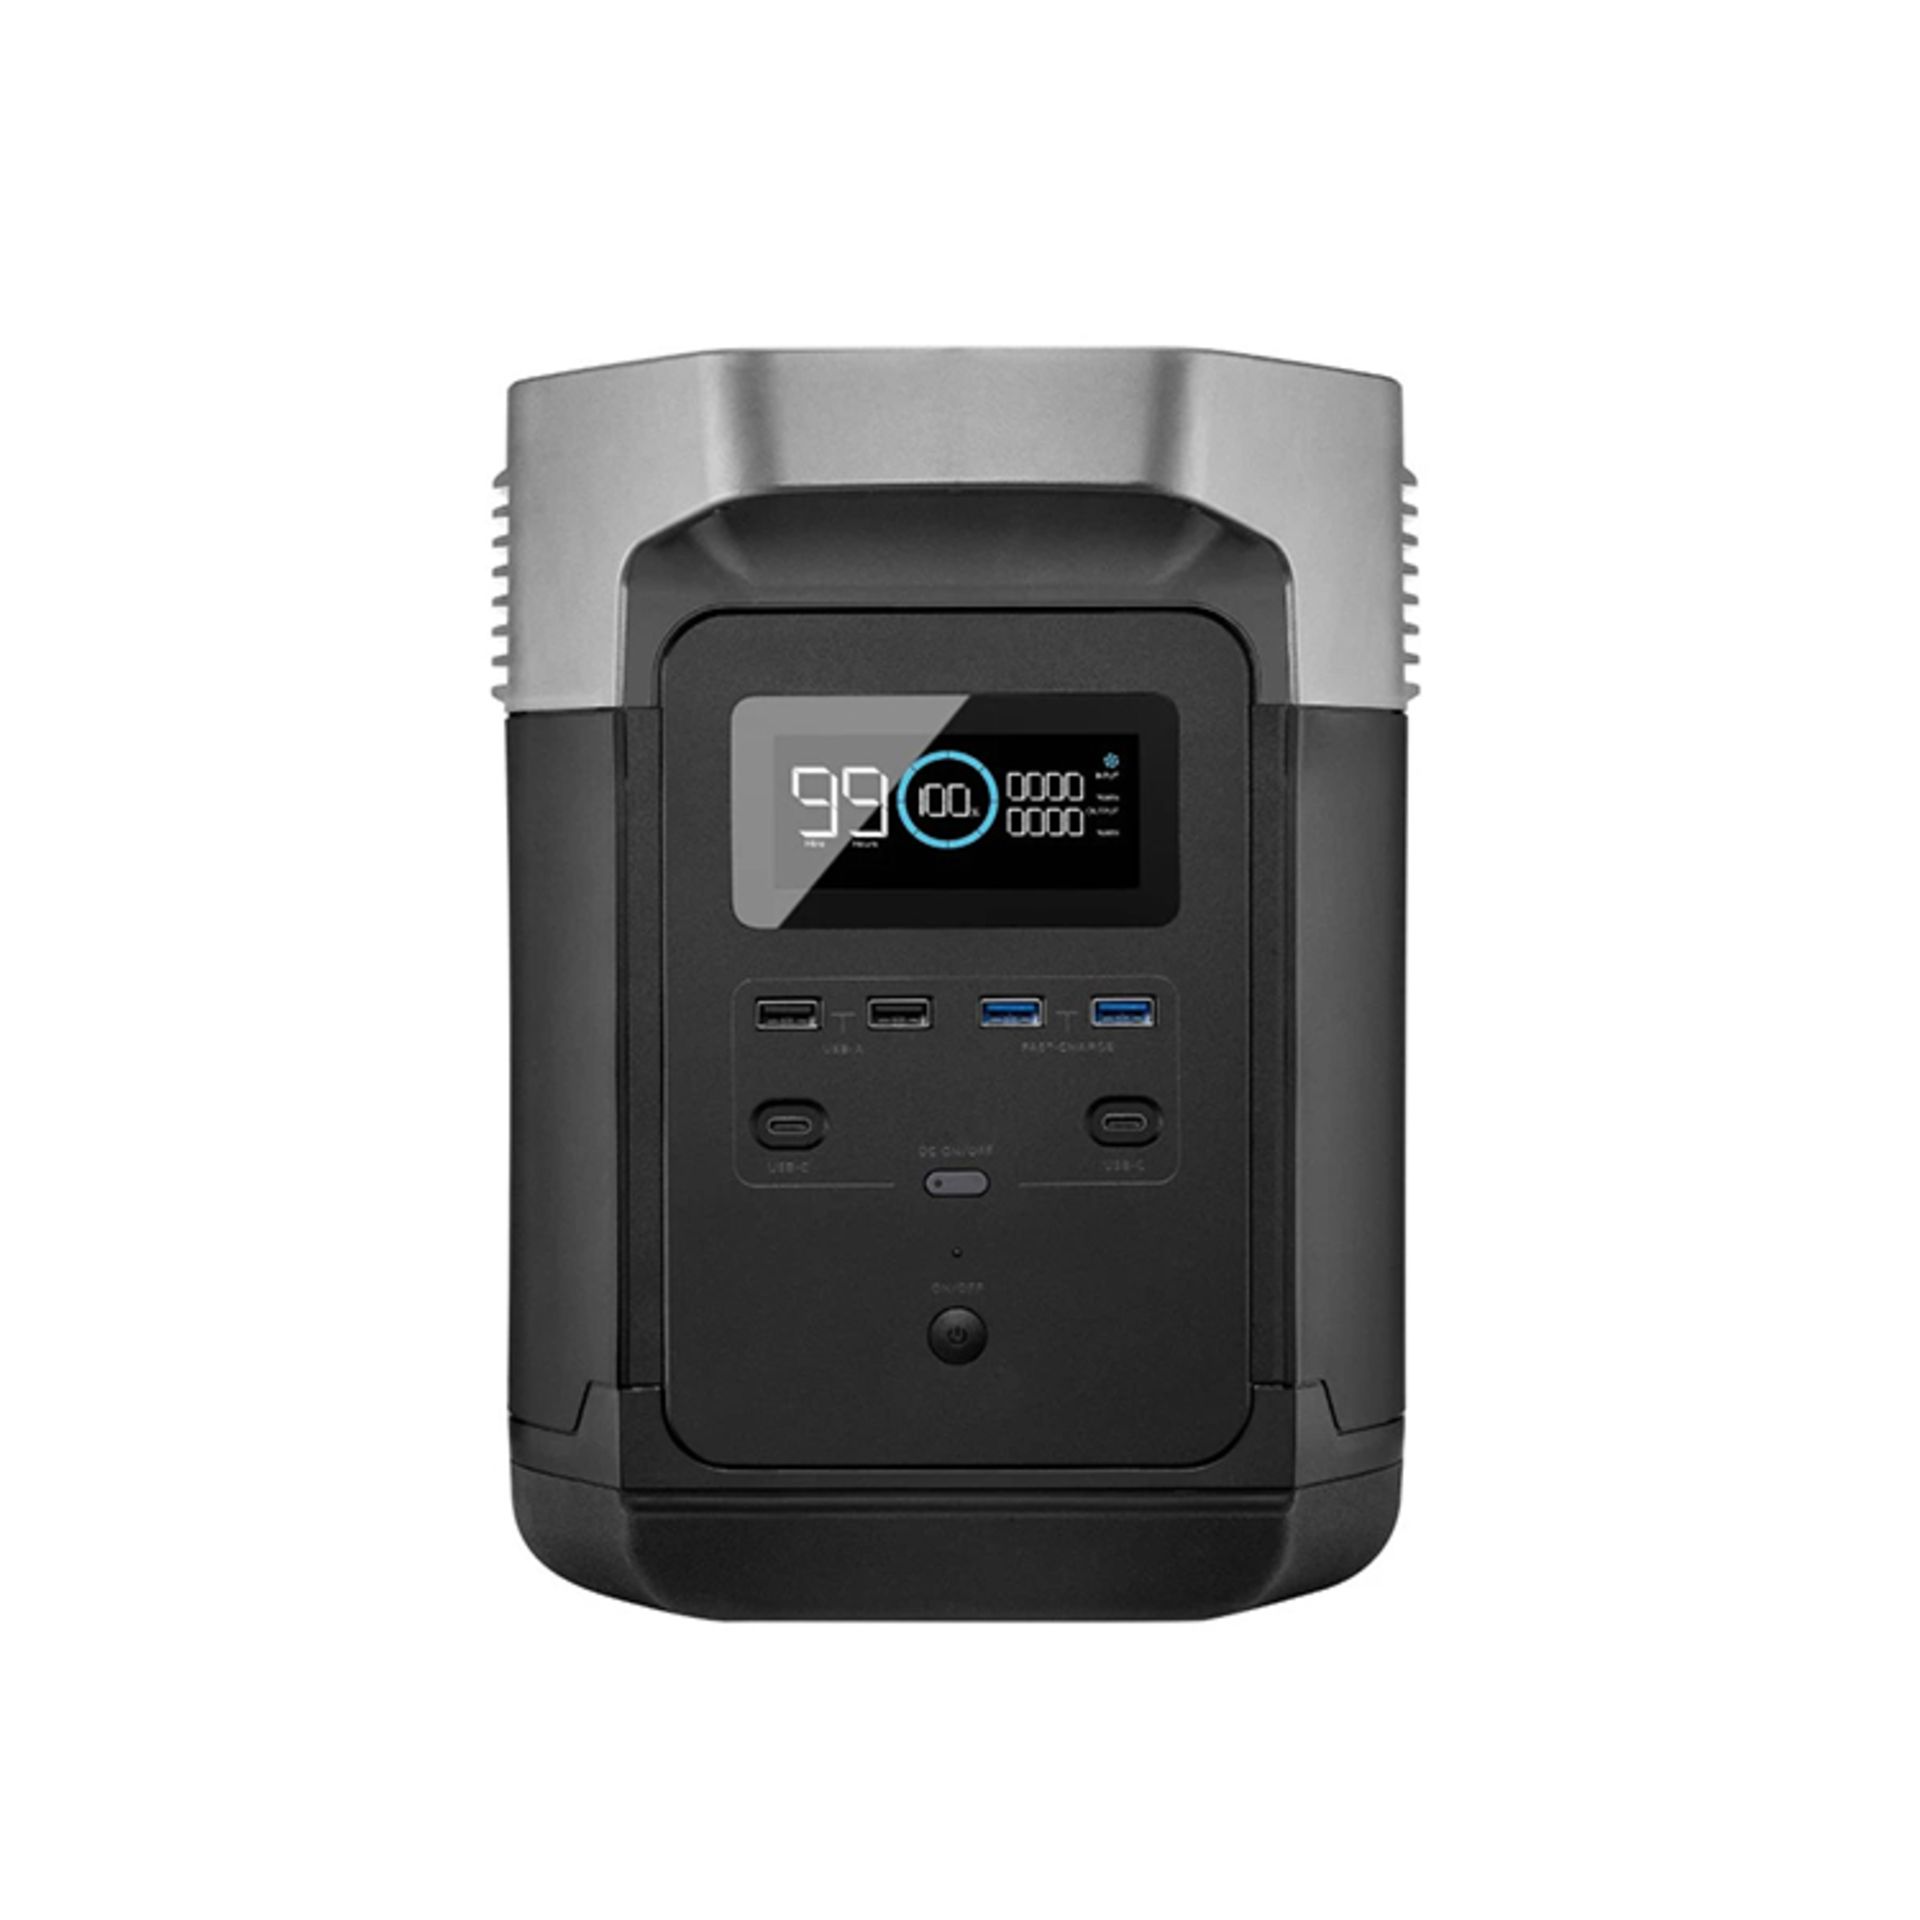 EcoFlow DELTA 1260Wh Power Station CUSTOMER RETURN - NOT CHECKED AND MAY BE DEFECTIVE, OR WITH